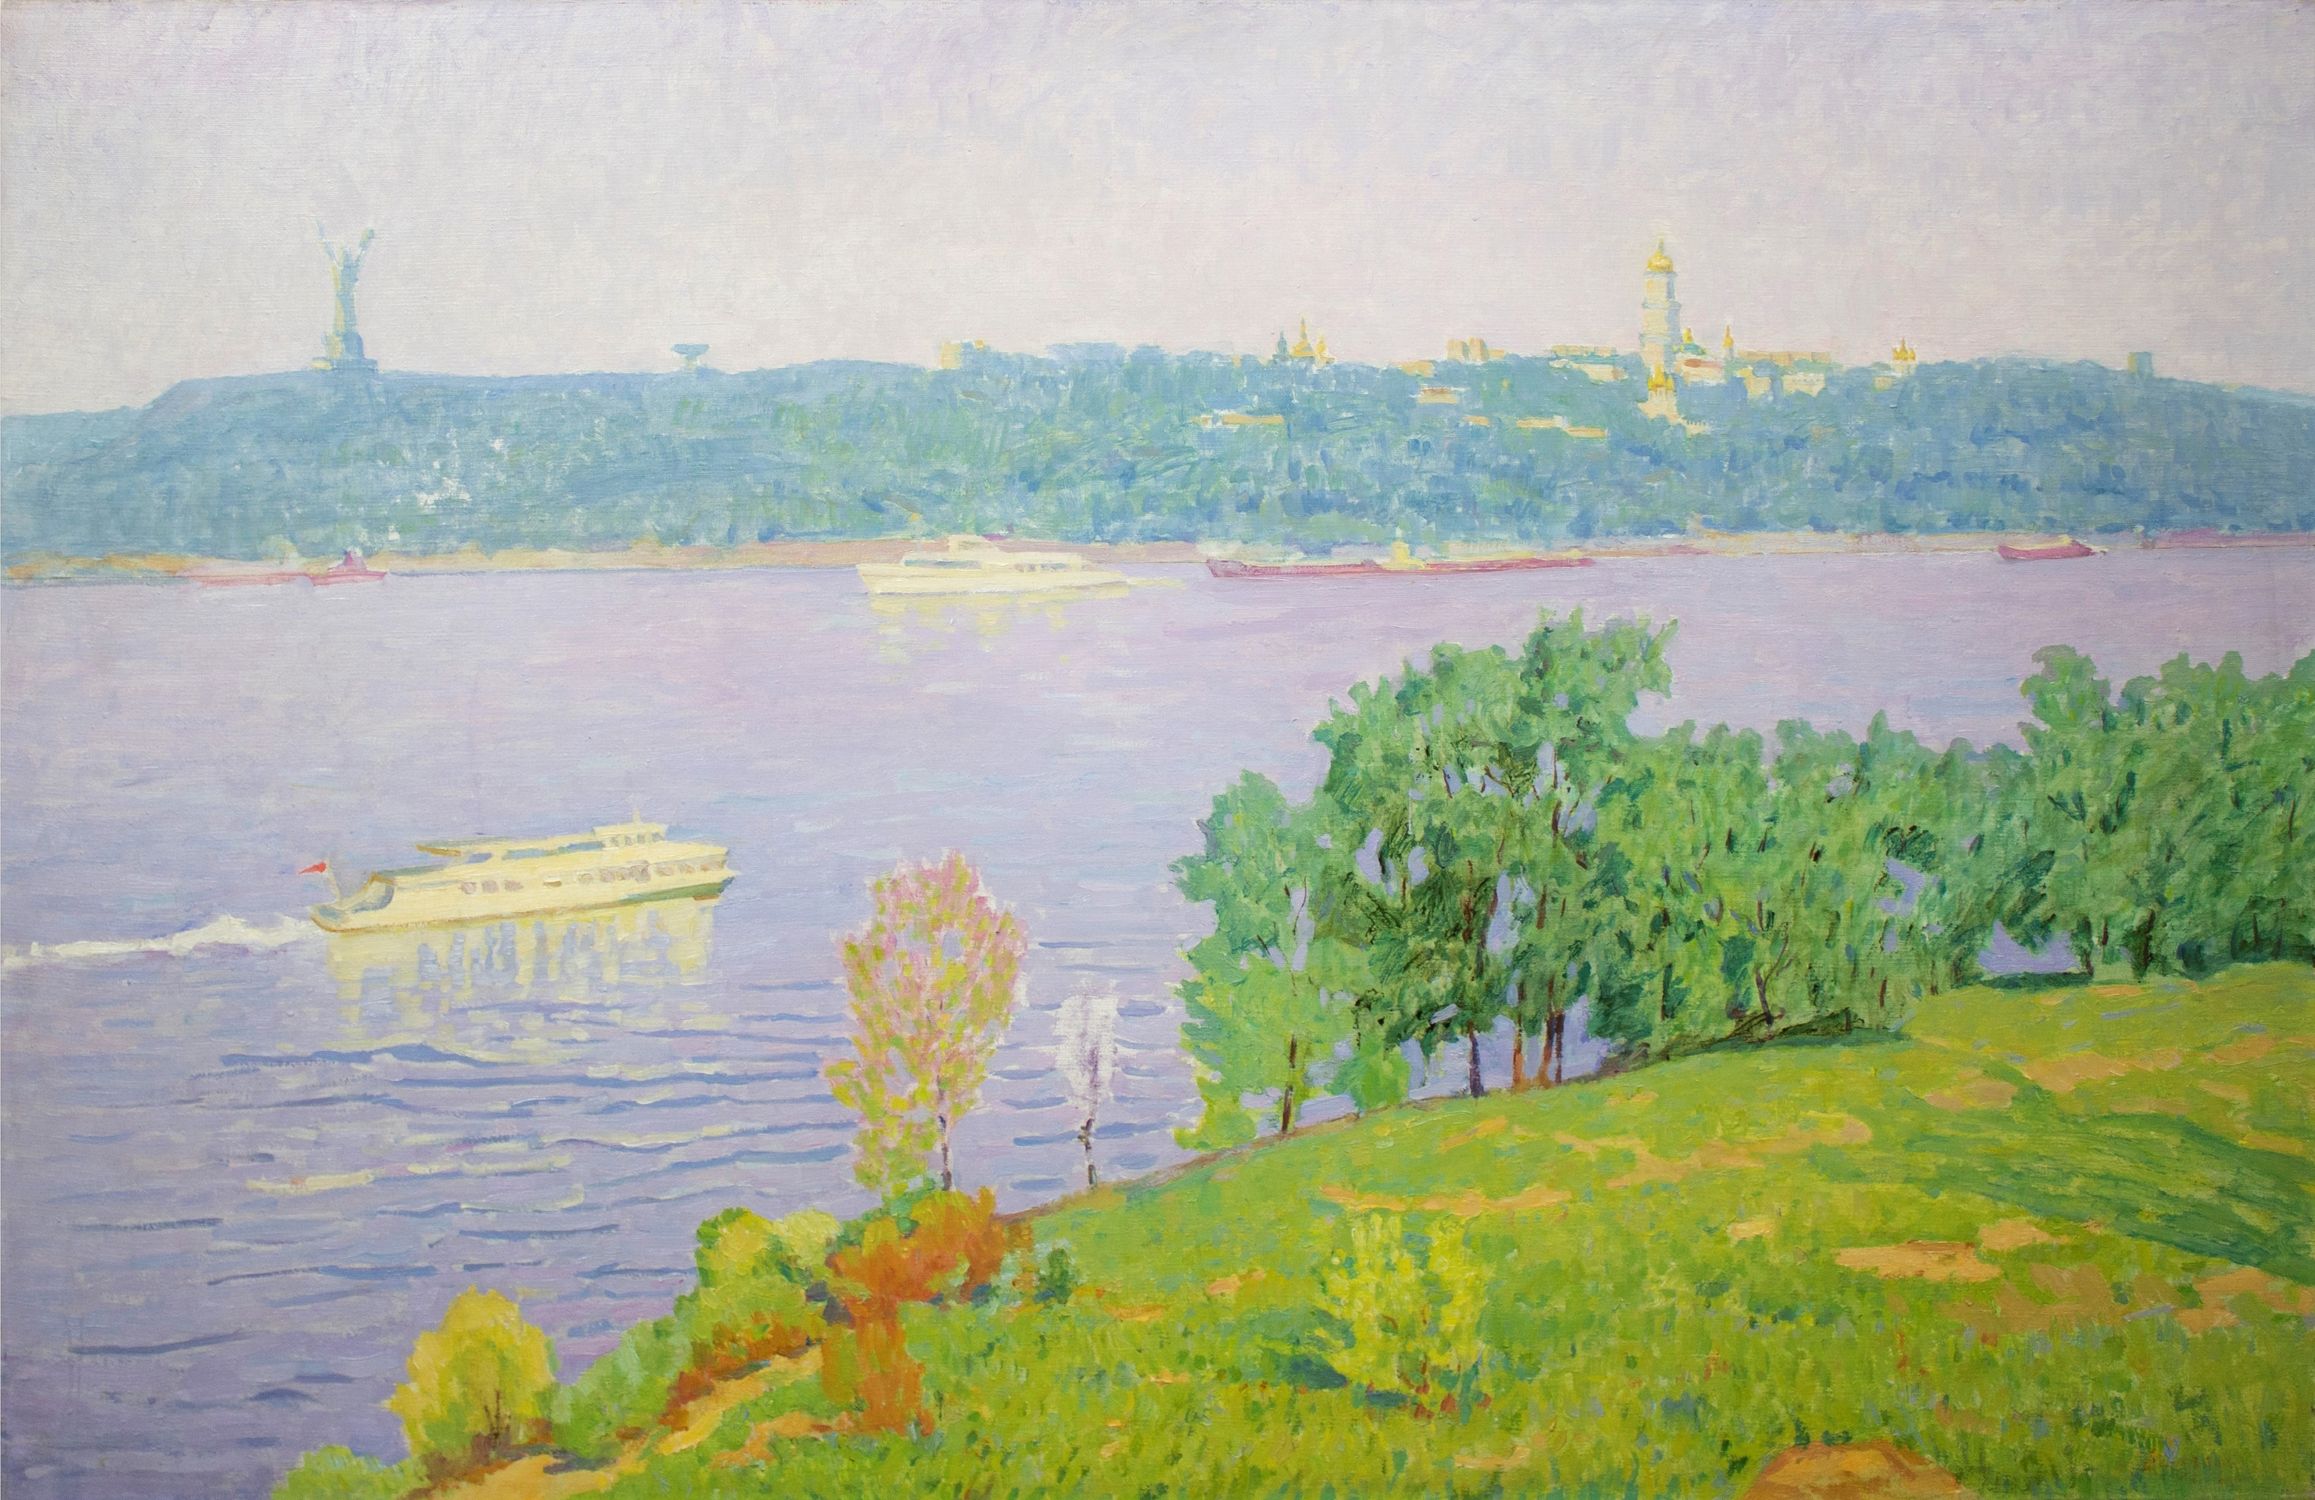 "Landscape of Kyiv from the left bank"